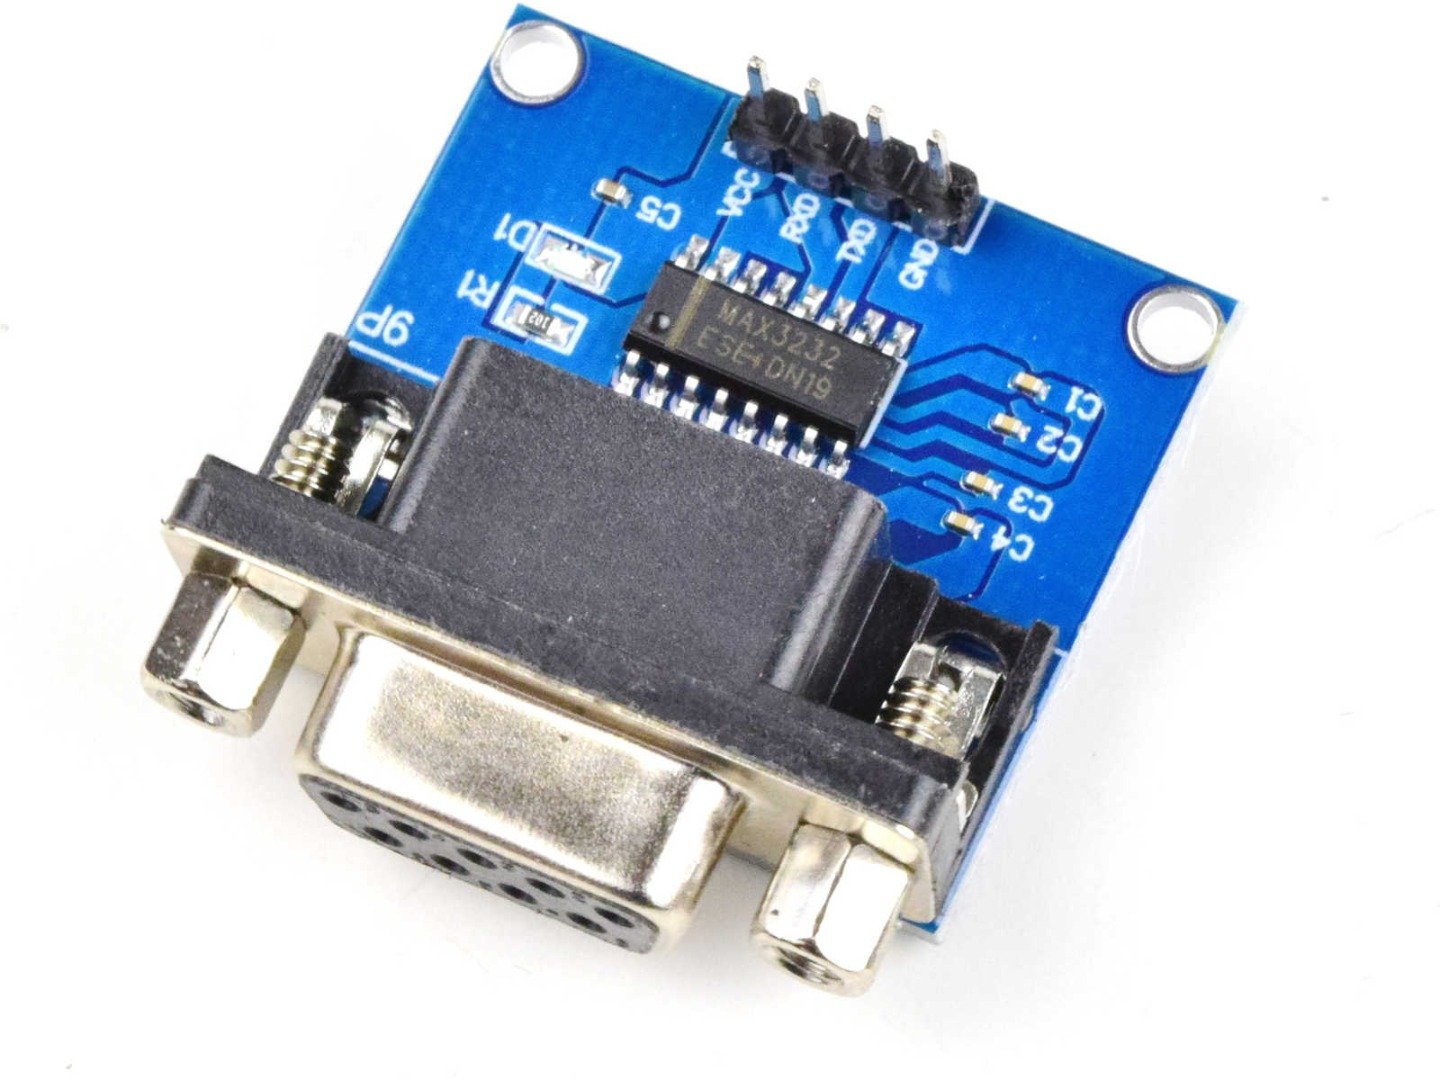 RS232 to TTL adapter MAX232, provides RS232 port for MCU or Arduino 4